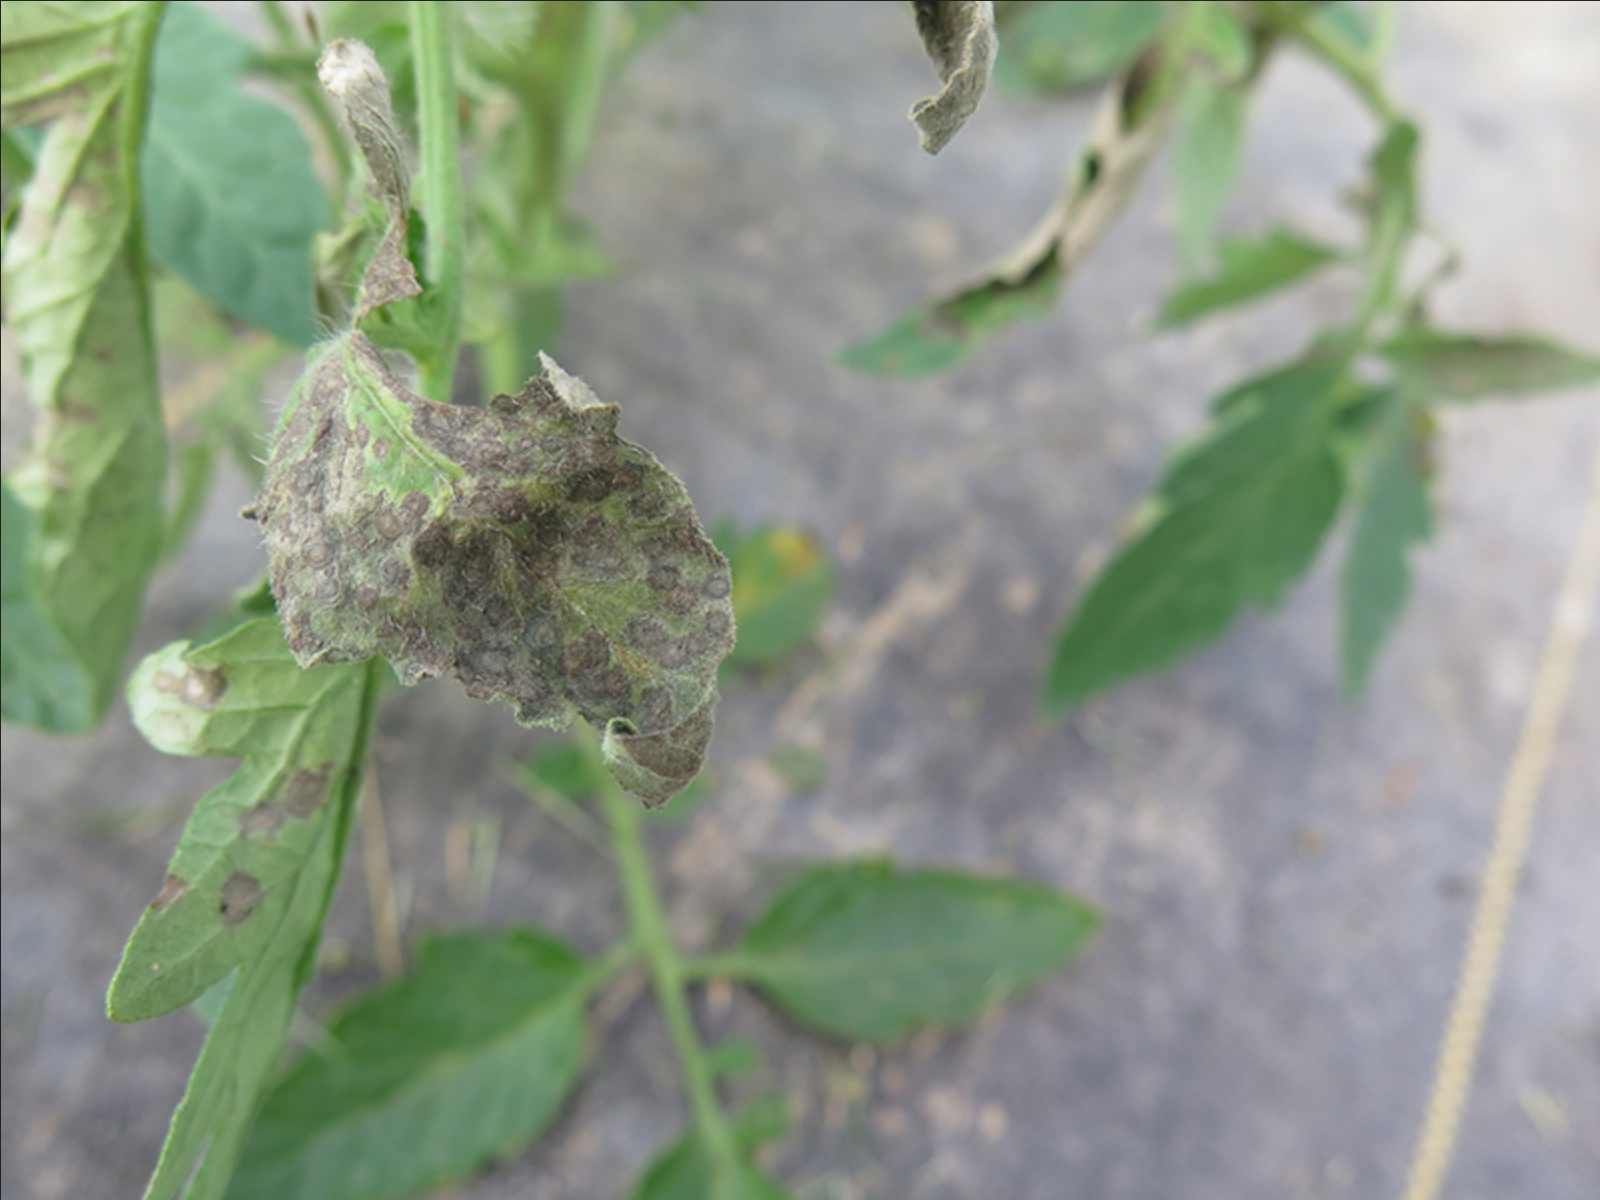 Tomato spotted wilt virus often causes a ringspot lesion on tomato leaves.